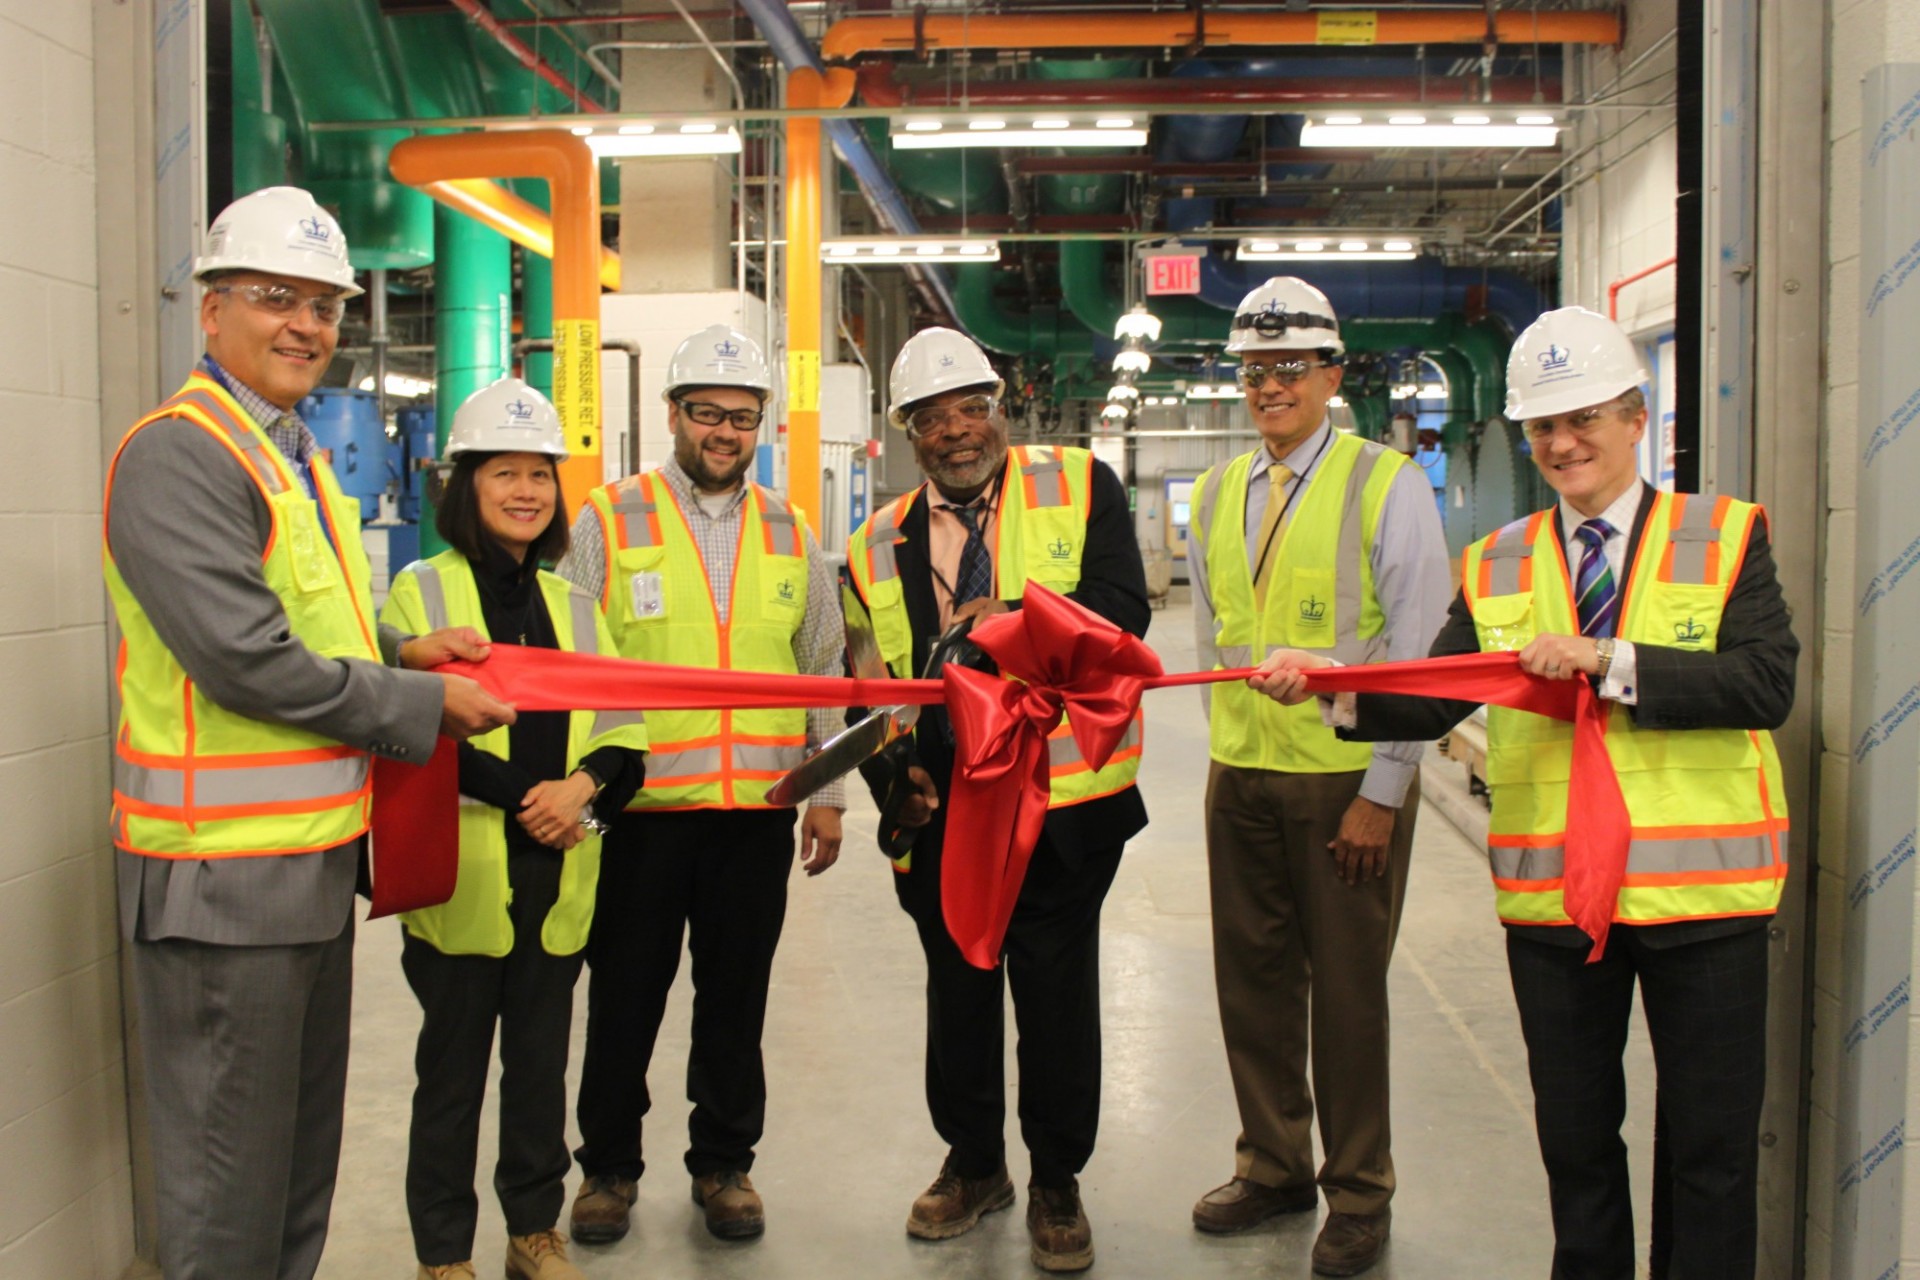 Photo from the ribbon cutting event marking the opening of the Central Energy Plant in Manhattanville.